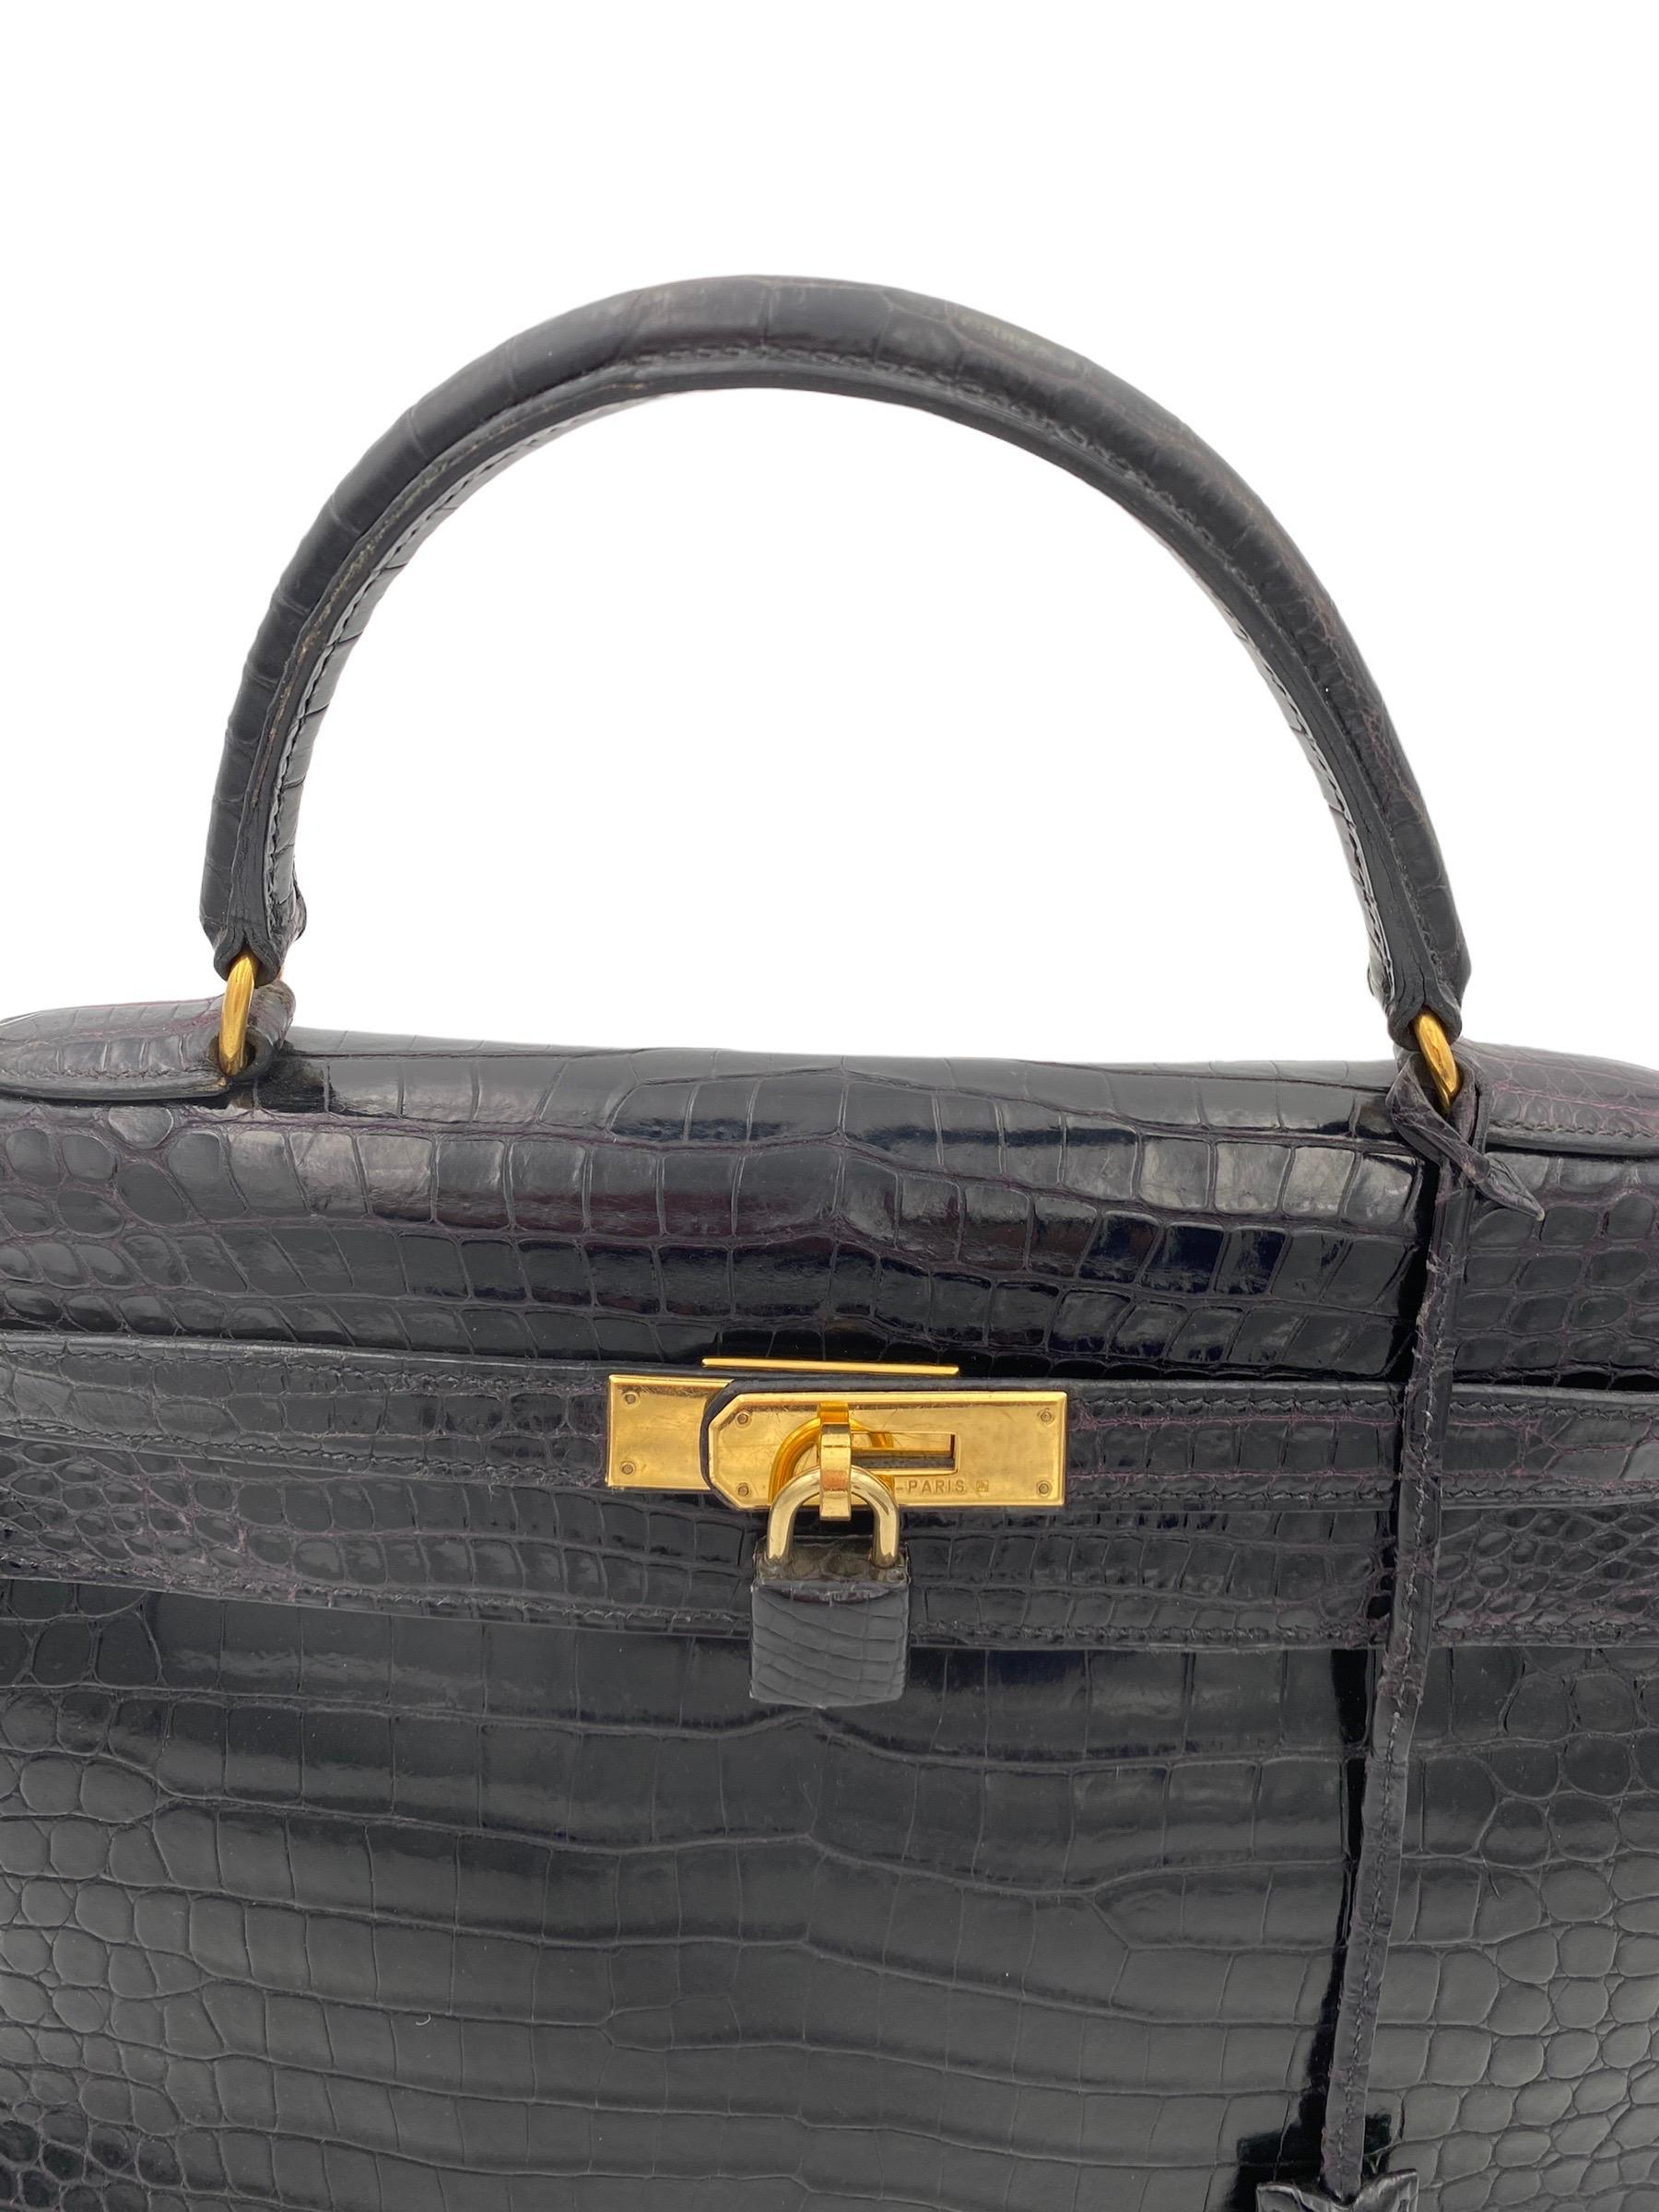 Hermès handbag, Kelly model, size 32, made in black leather with golden hardwrae. Equipped with the classic flap with interlocking closure with band, padlock and keys. Equipped with a central leather handle for hand carrying and a removable thin